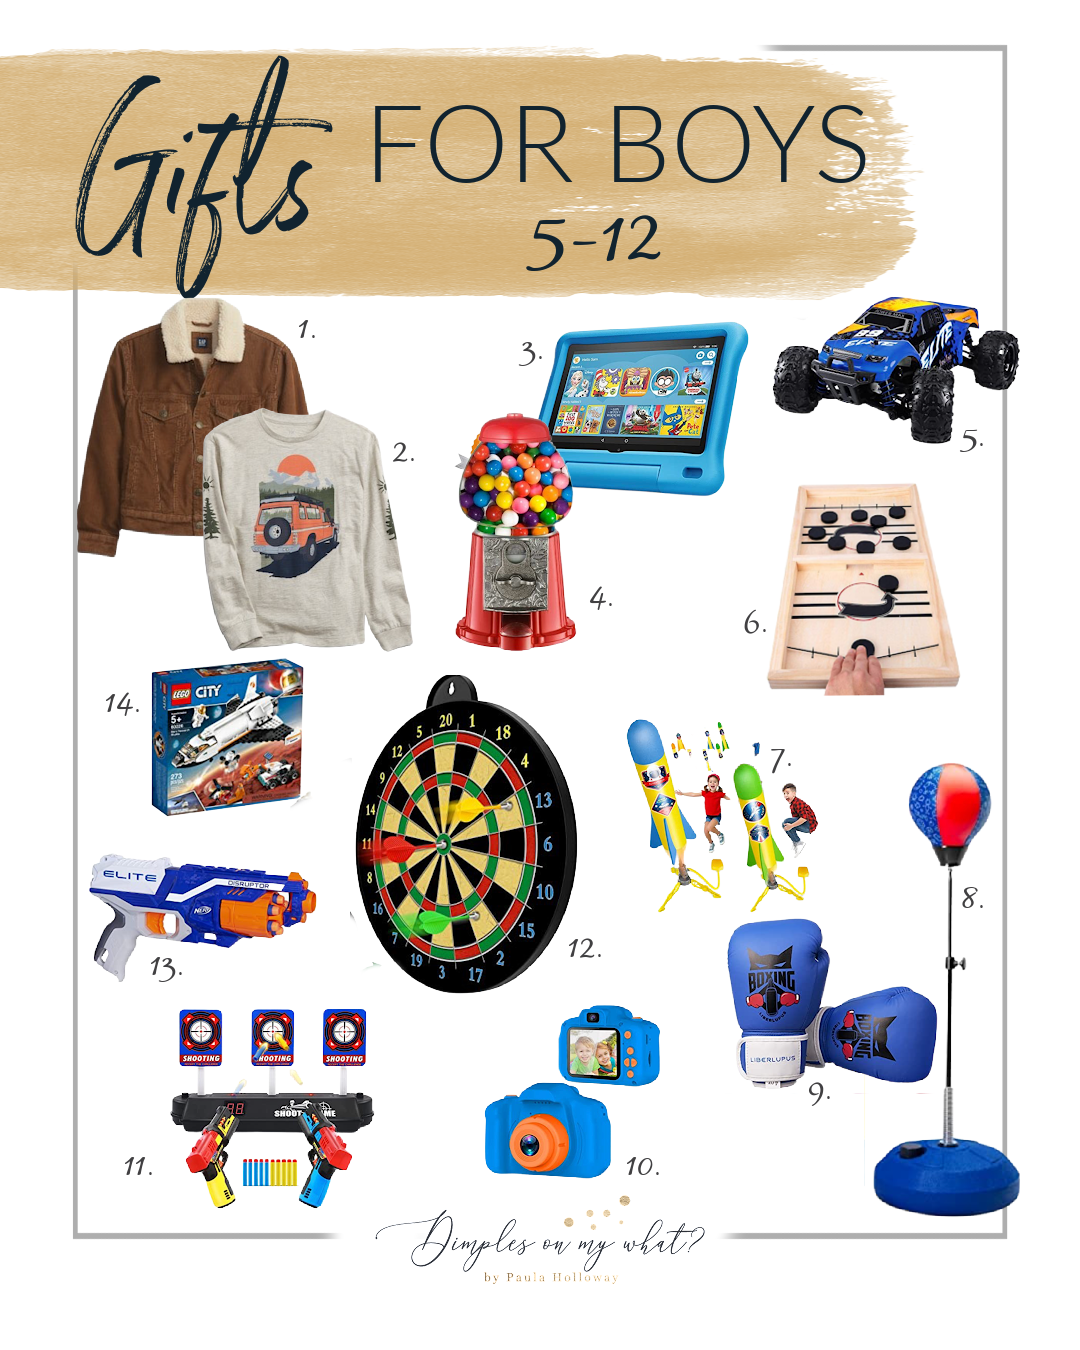 Christmas gift ideas for boy aged 5-12 and kid-friendly holiday activites that are fun for the who family.

#christmasgiftsforlittleboys #boyschristmaspresents #giftguideforgrandchildren #giftideasforgransons